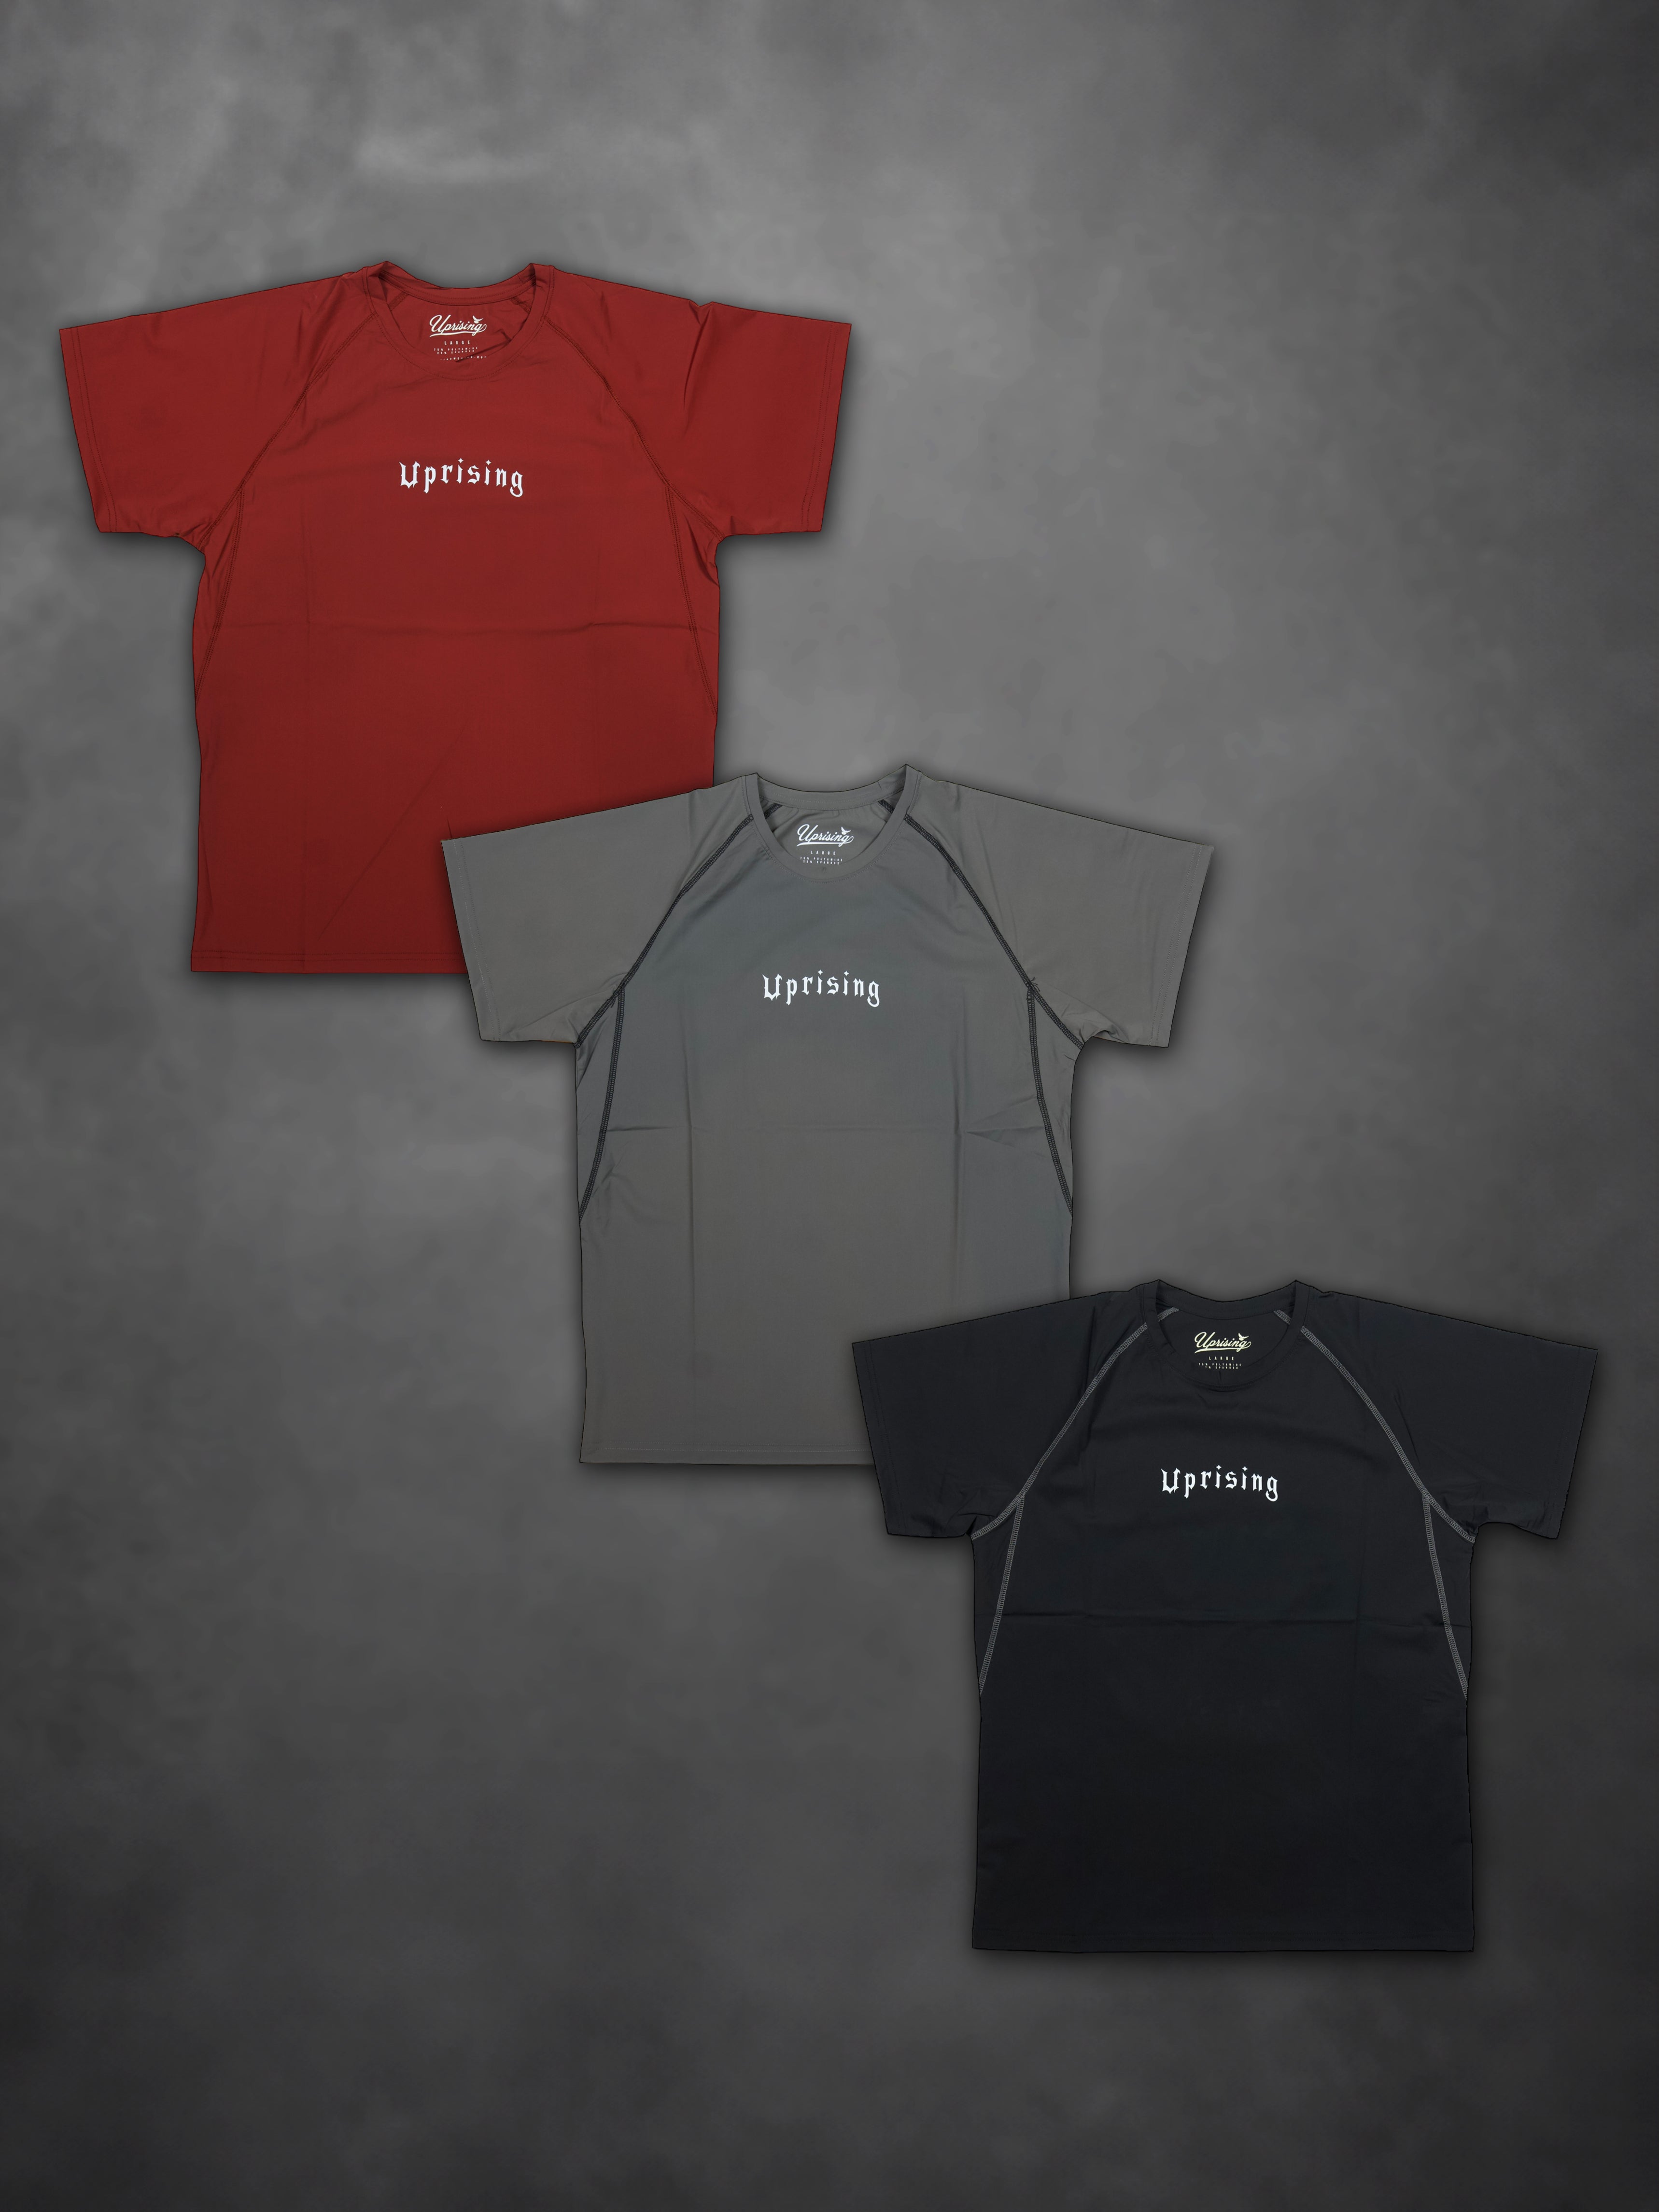 Uprising Compression Shirts (Please Read)